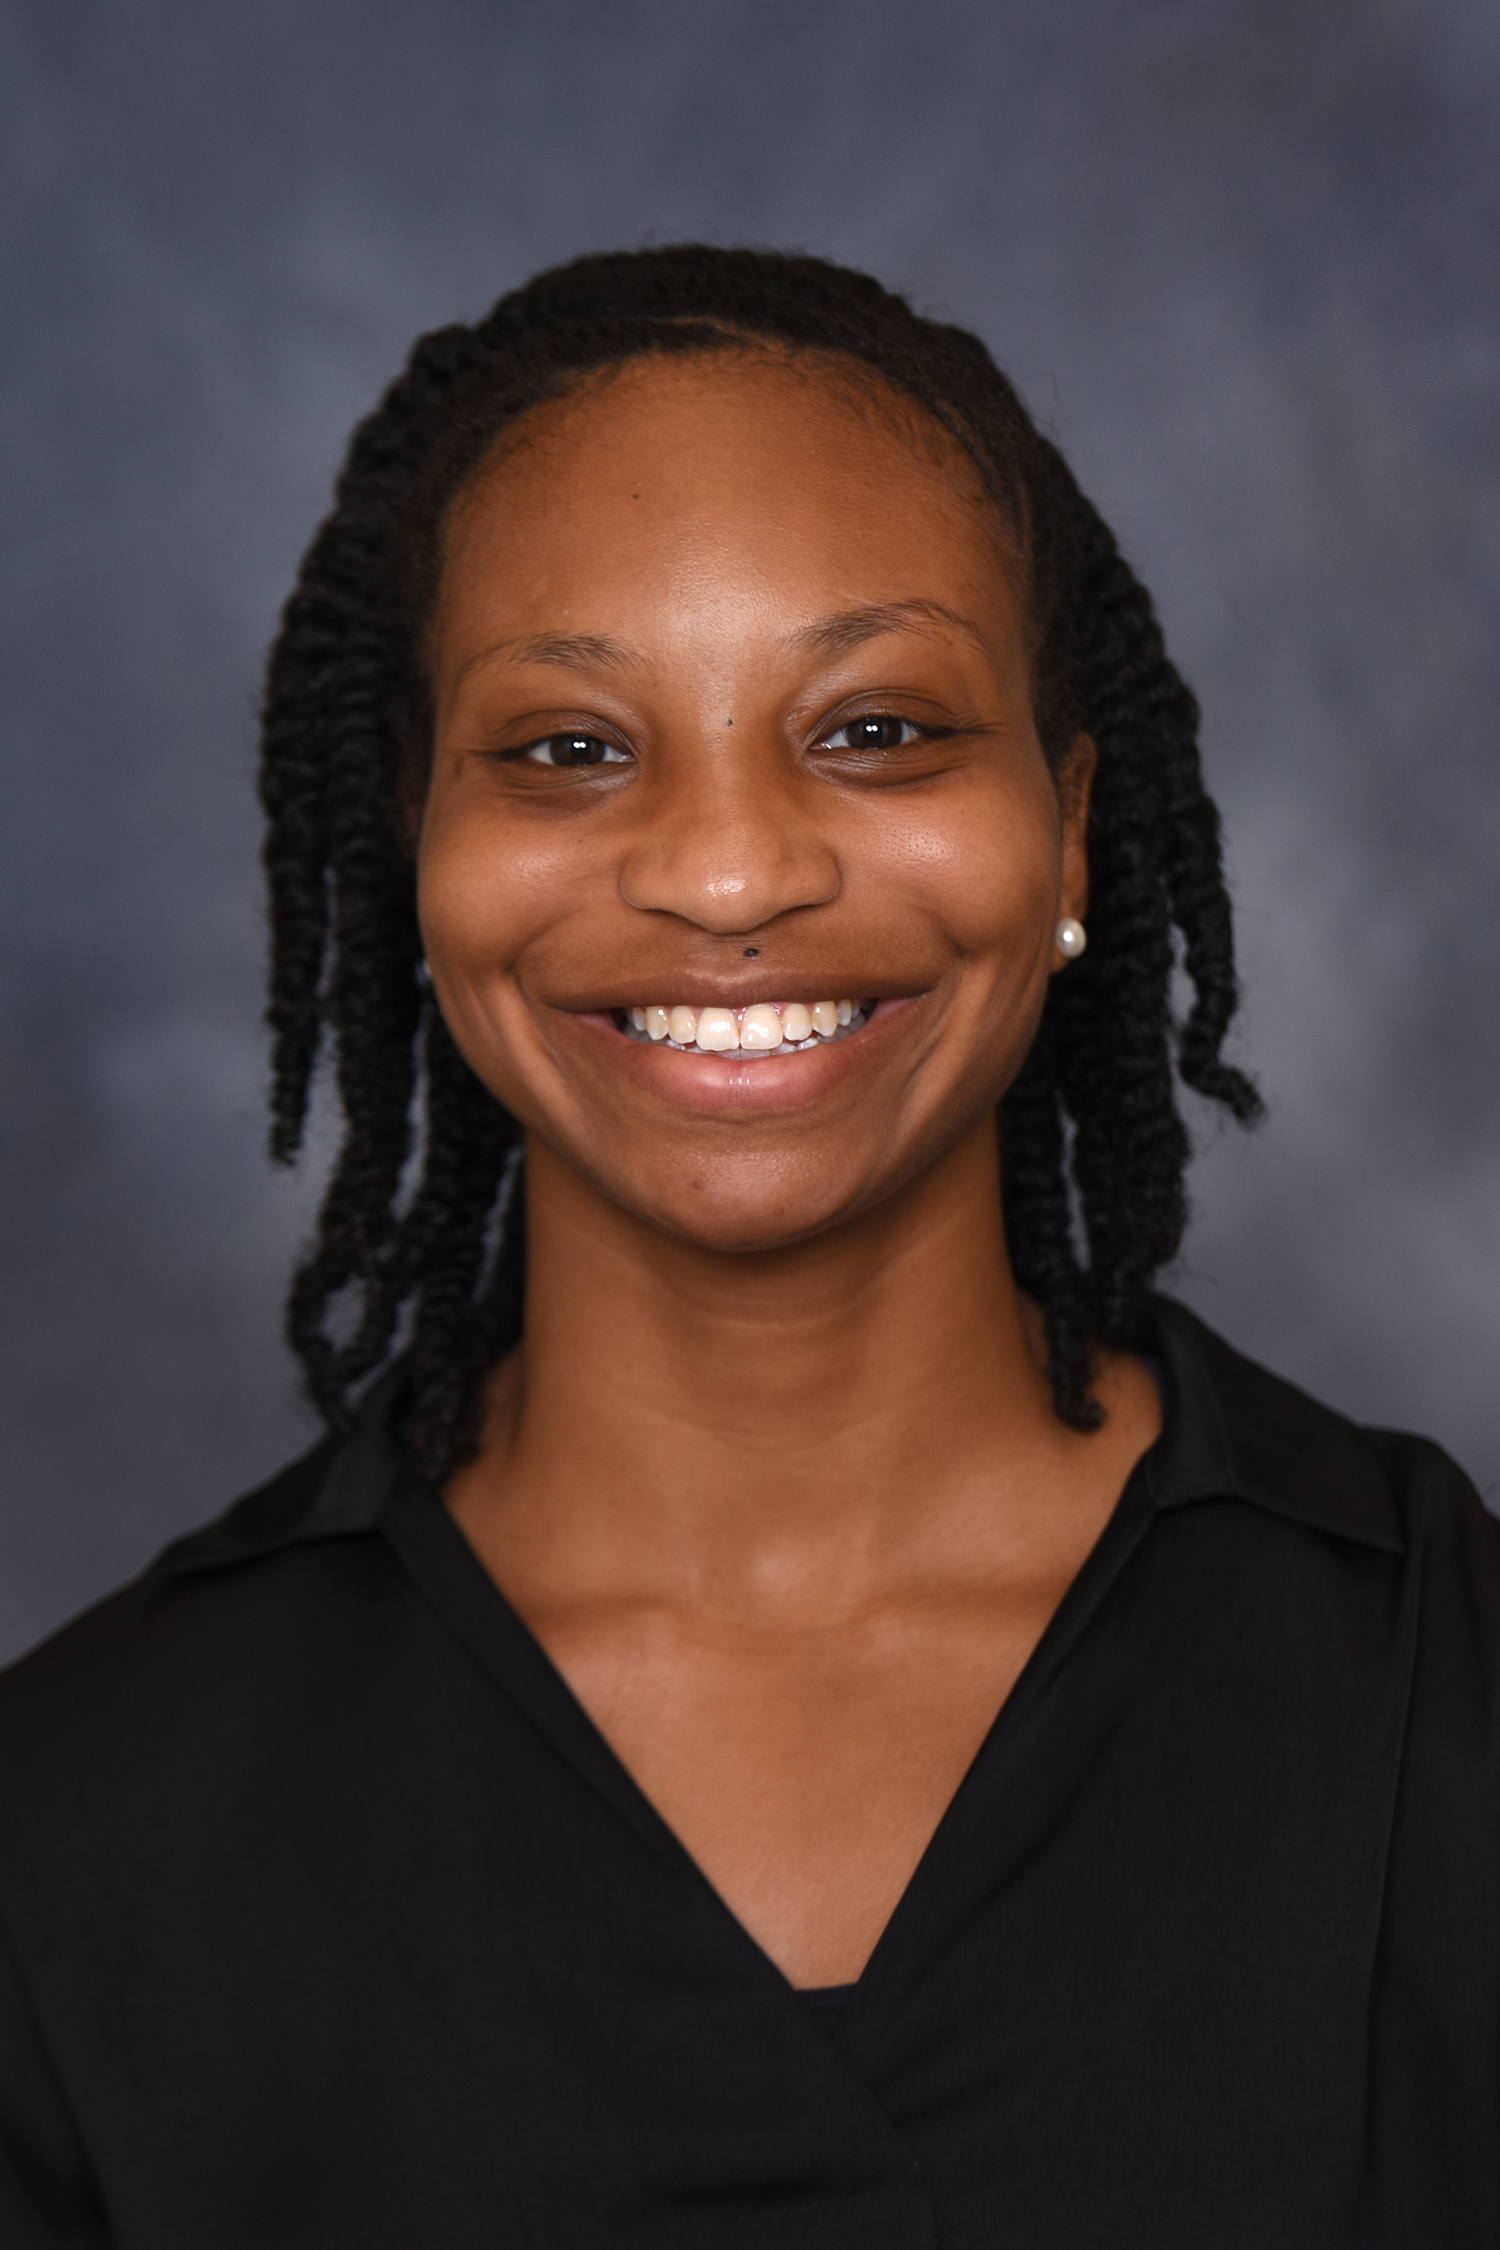 Congratulations to Gabby Connally for being selected as Public Administration and Policy’s MPA Student of the Month!